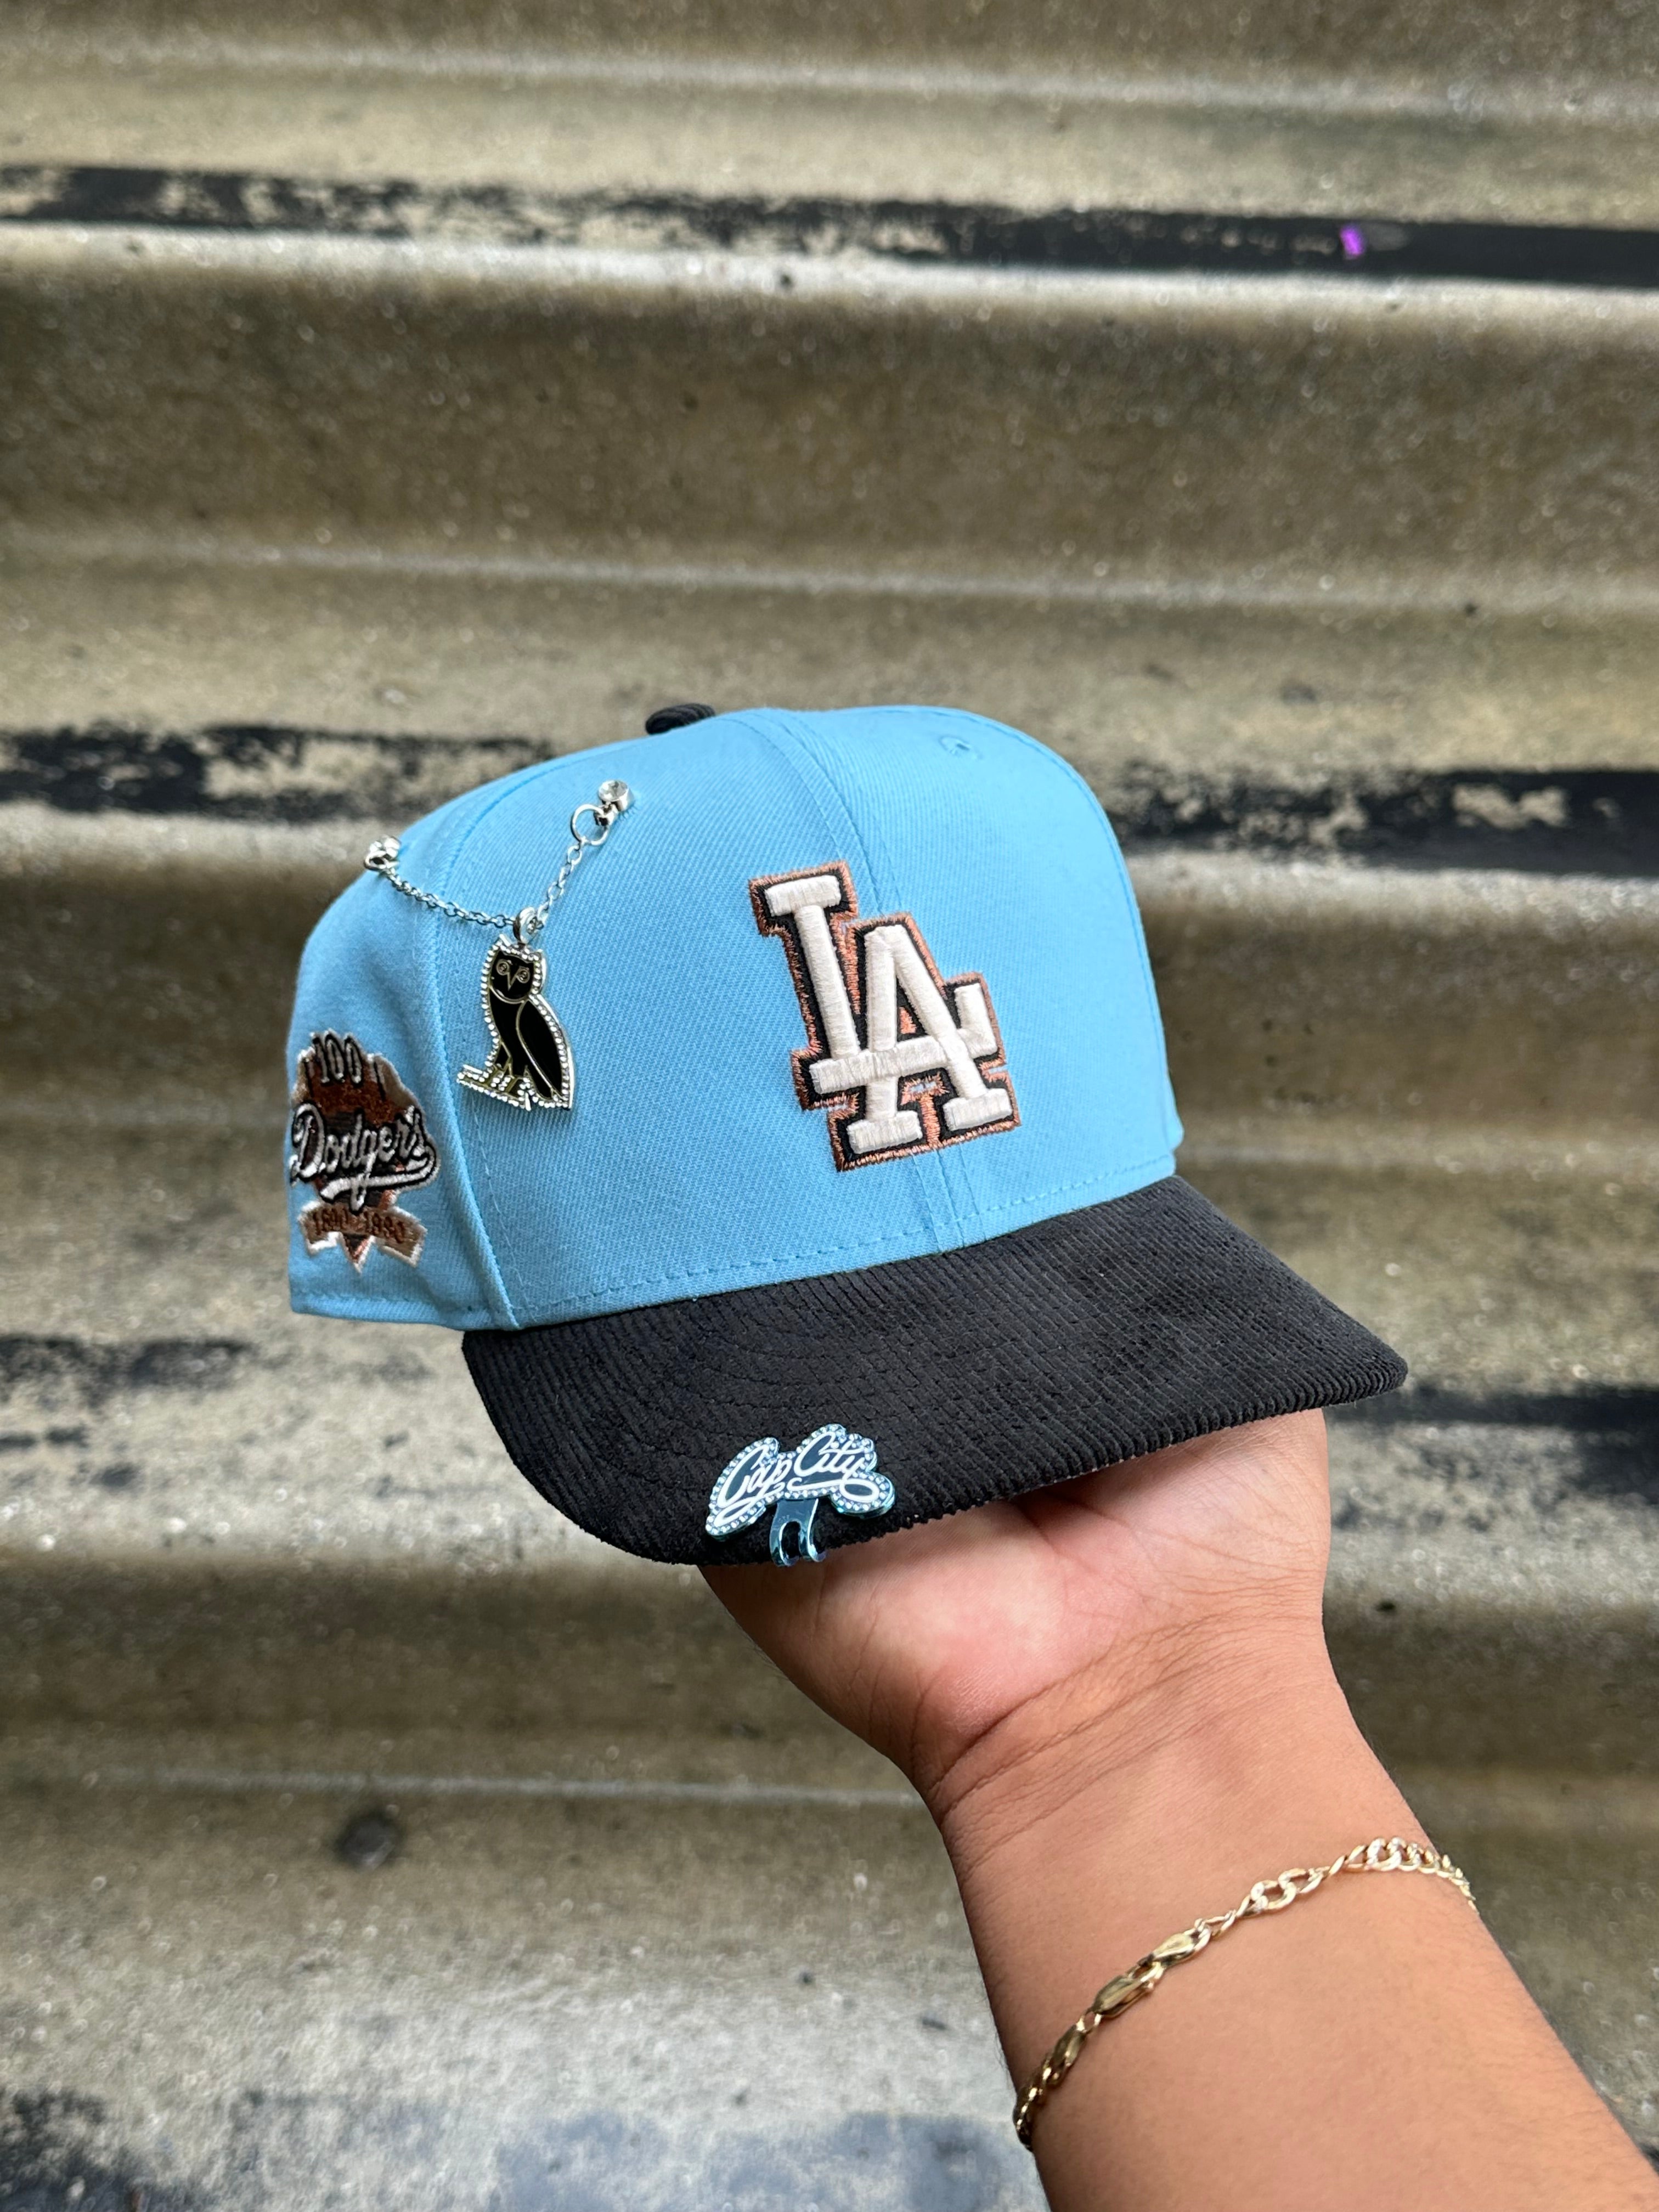 NEW ERA EXCLUSIVE 9FIFTY SKY BLUE/CORDUROY LOS ANGELES DODGERS SNAPBACK W/ 100TH ANNIVERSARY PATCH